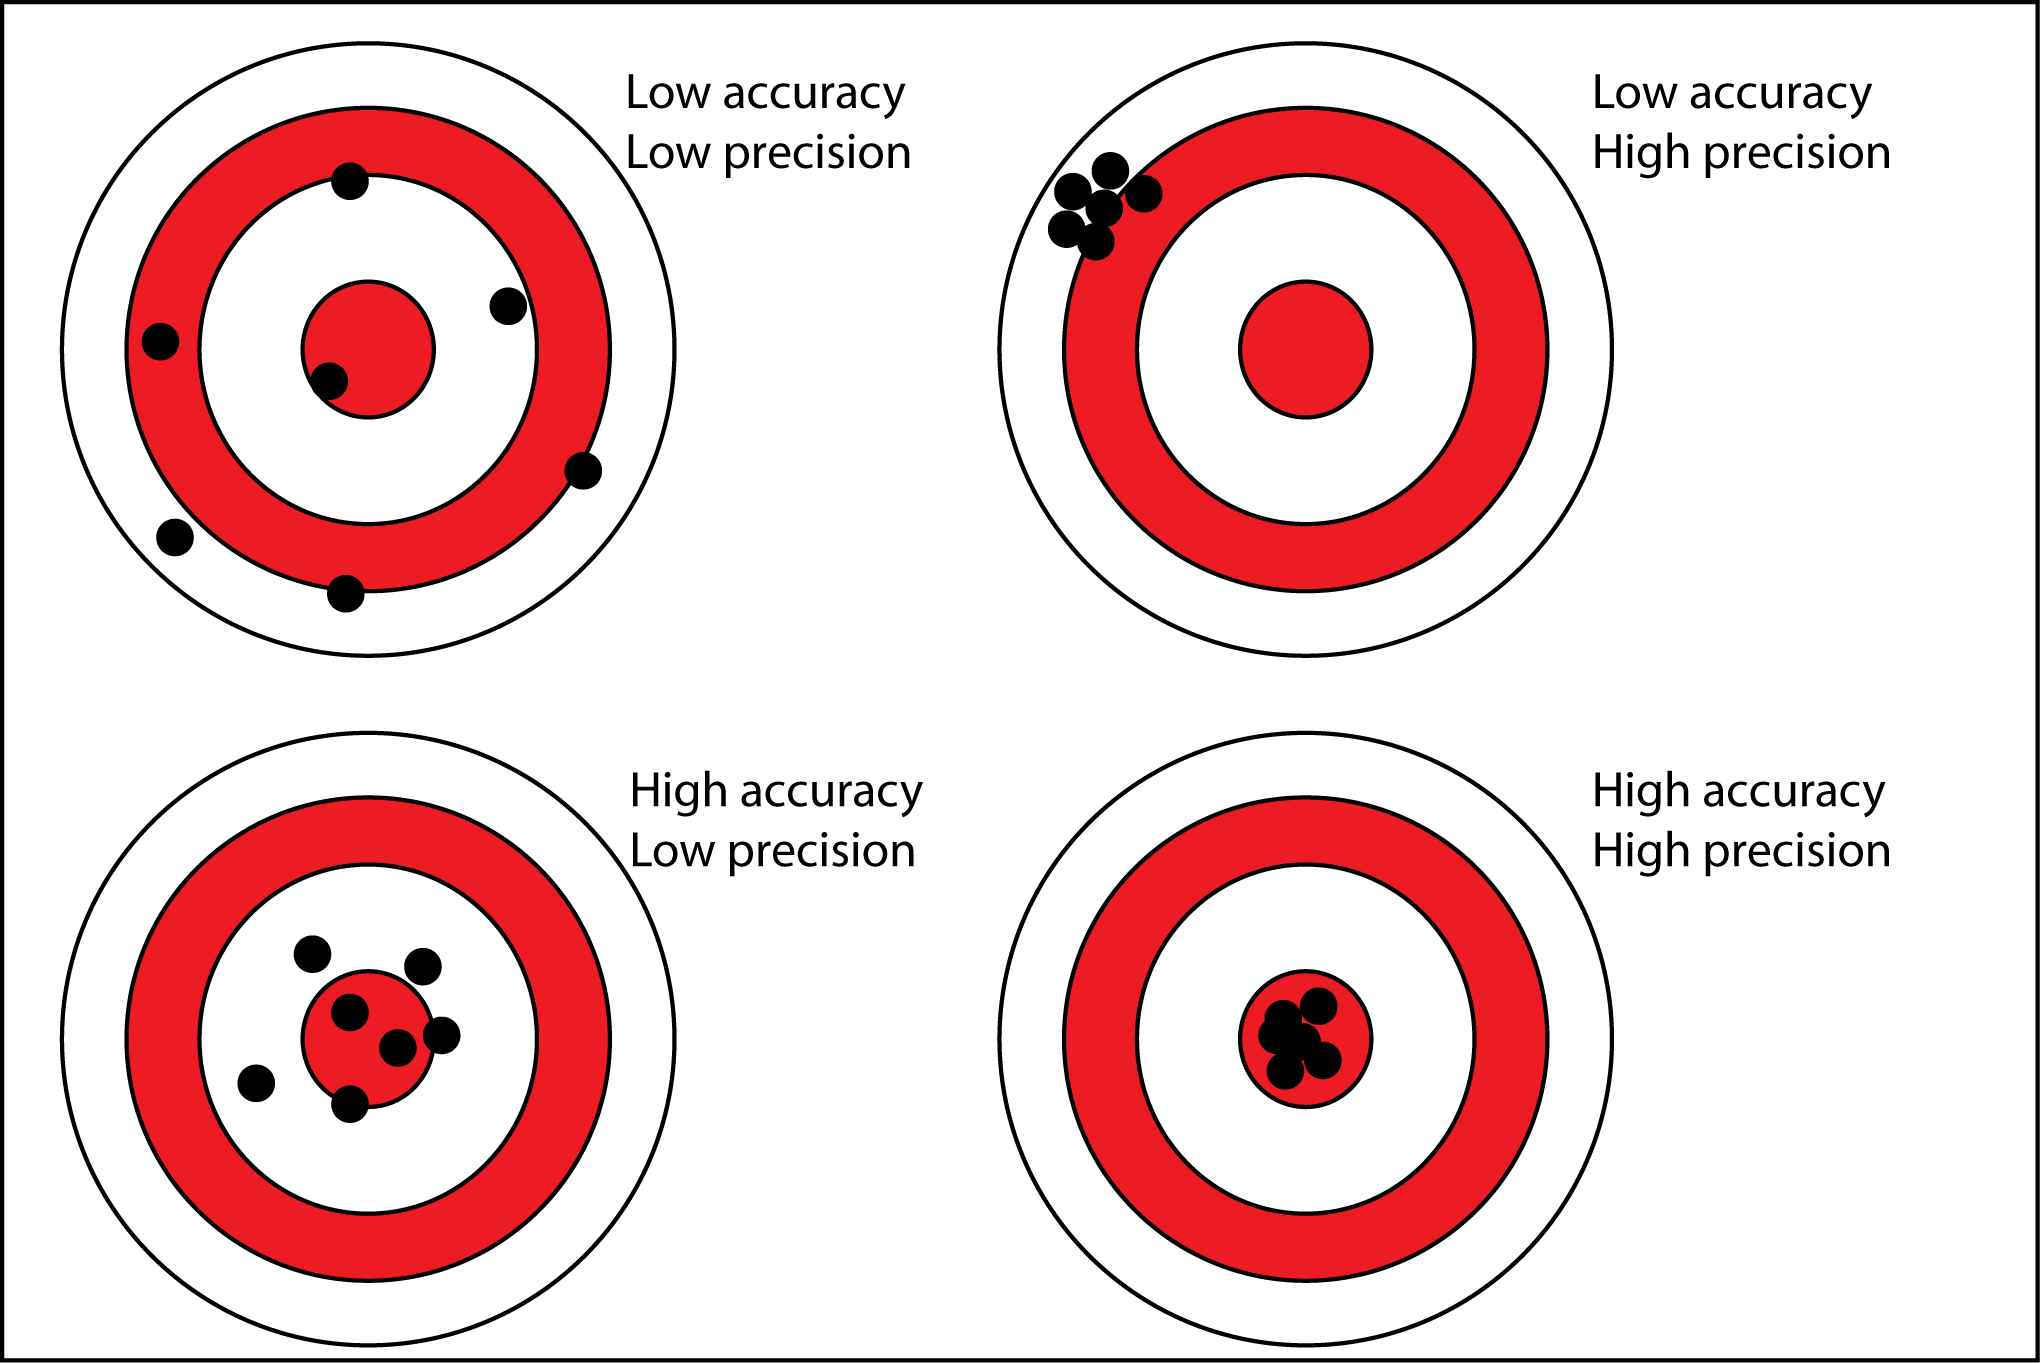 The effect of systematic and random uncertainties on accuracy and precision.